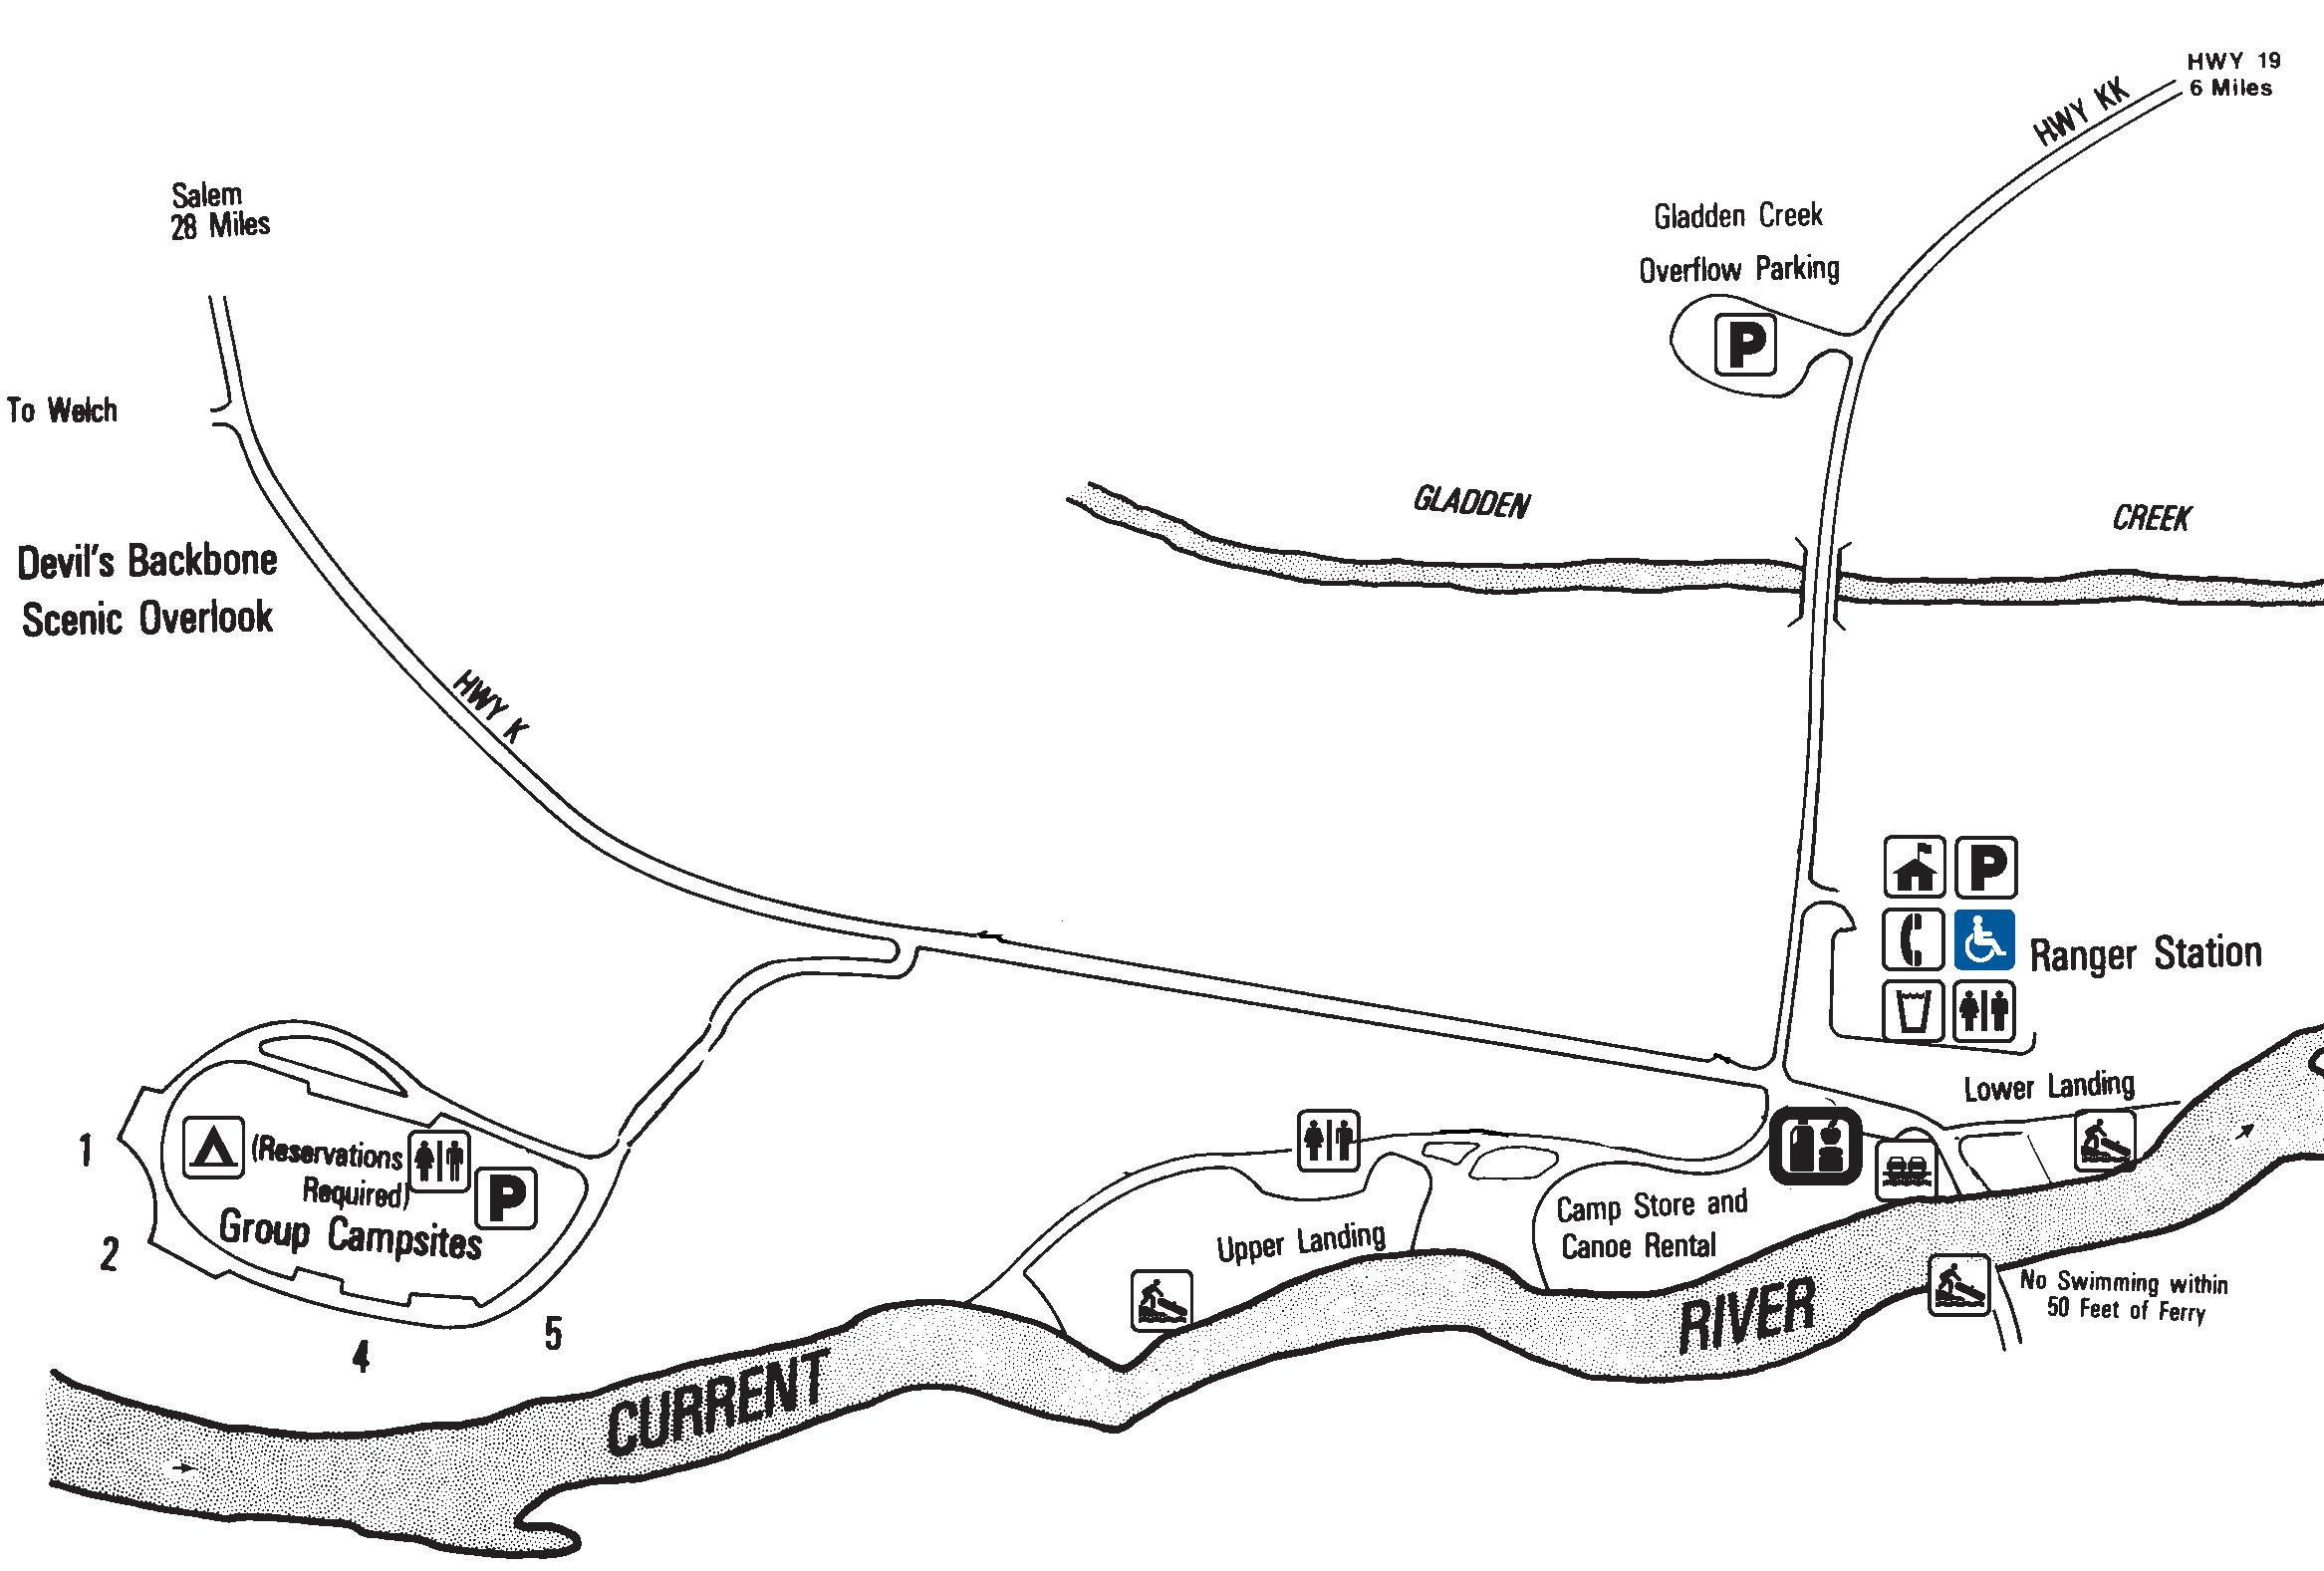 Map showing campsites, restrooms, ranger station, roads and river